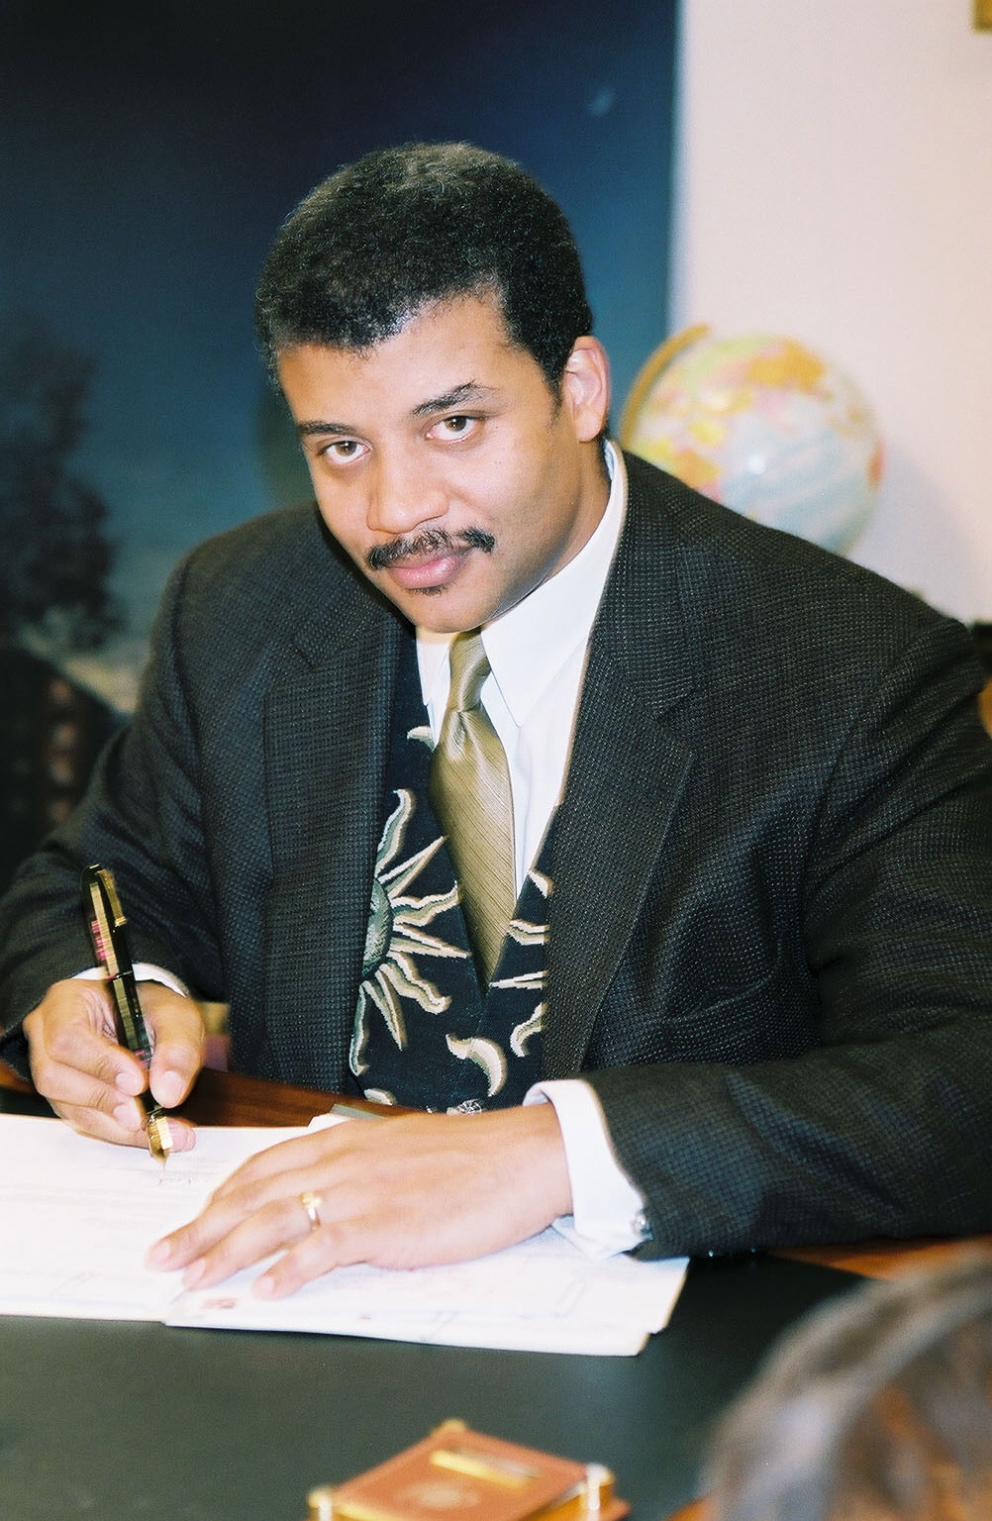 Neil deGrasse Tyson sitting at his desk signing a paper.